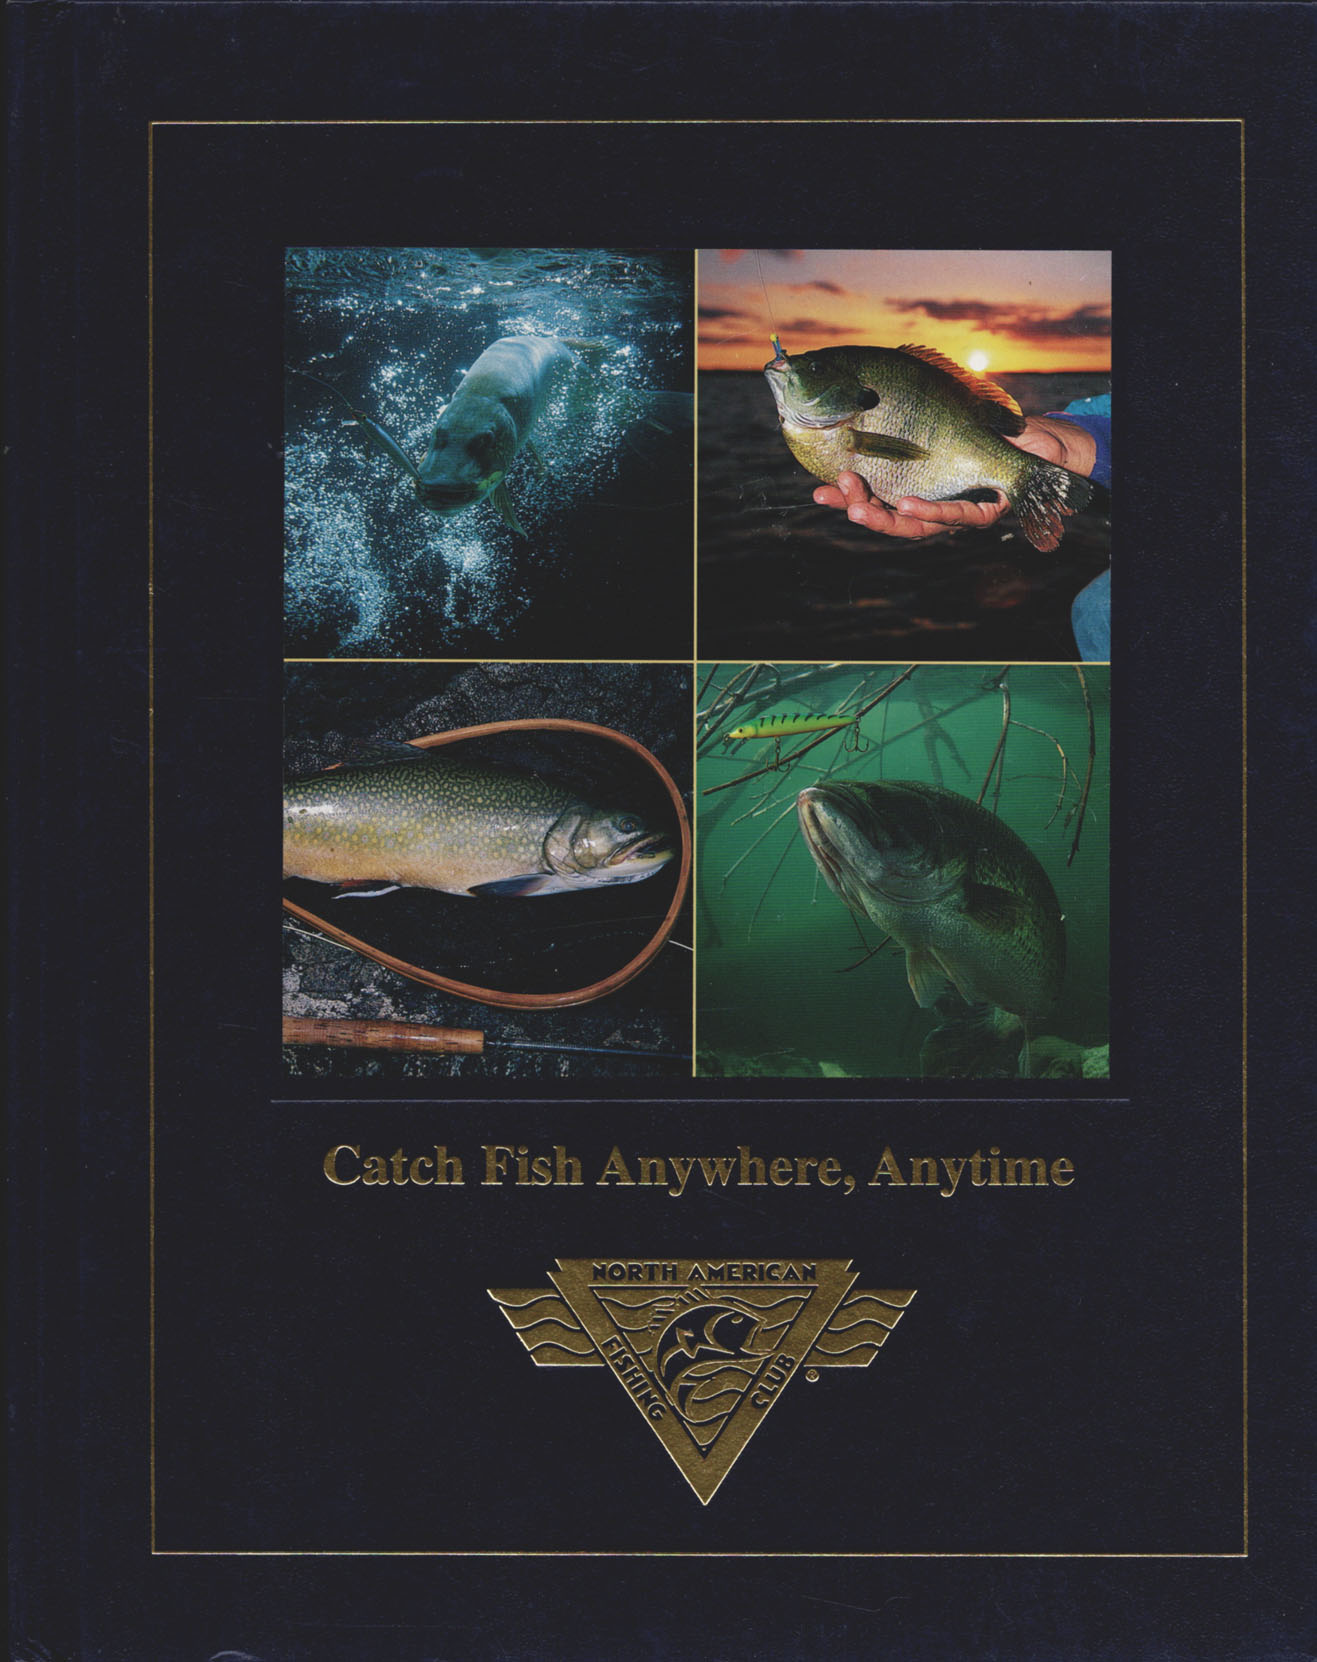 CATCH FISH ANYWHERE, ANYTIME - North American Fishing Club